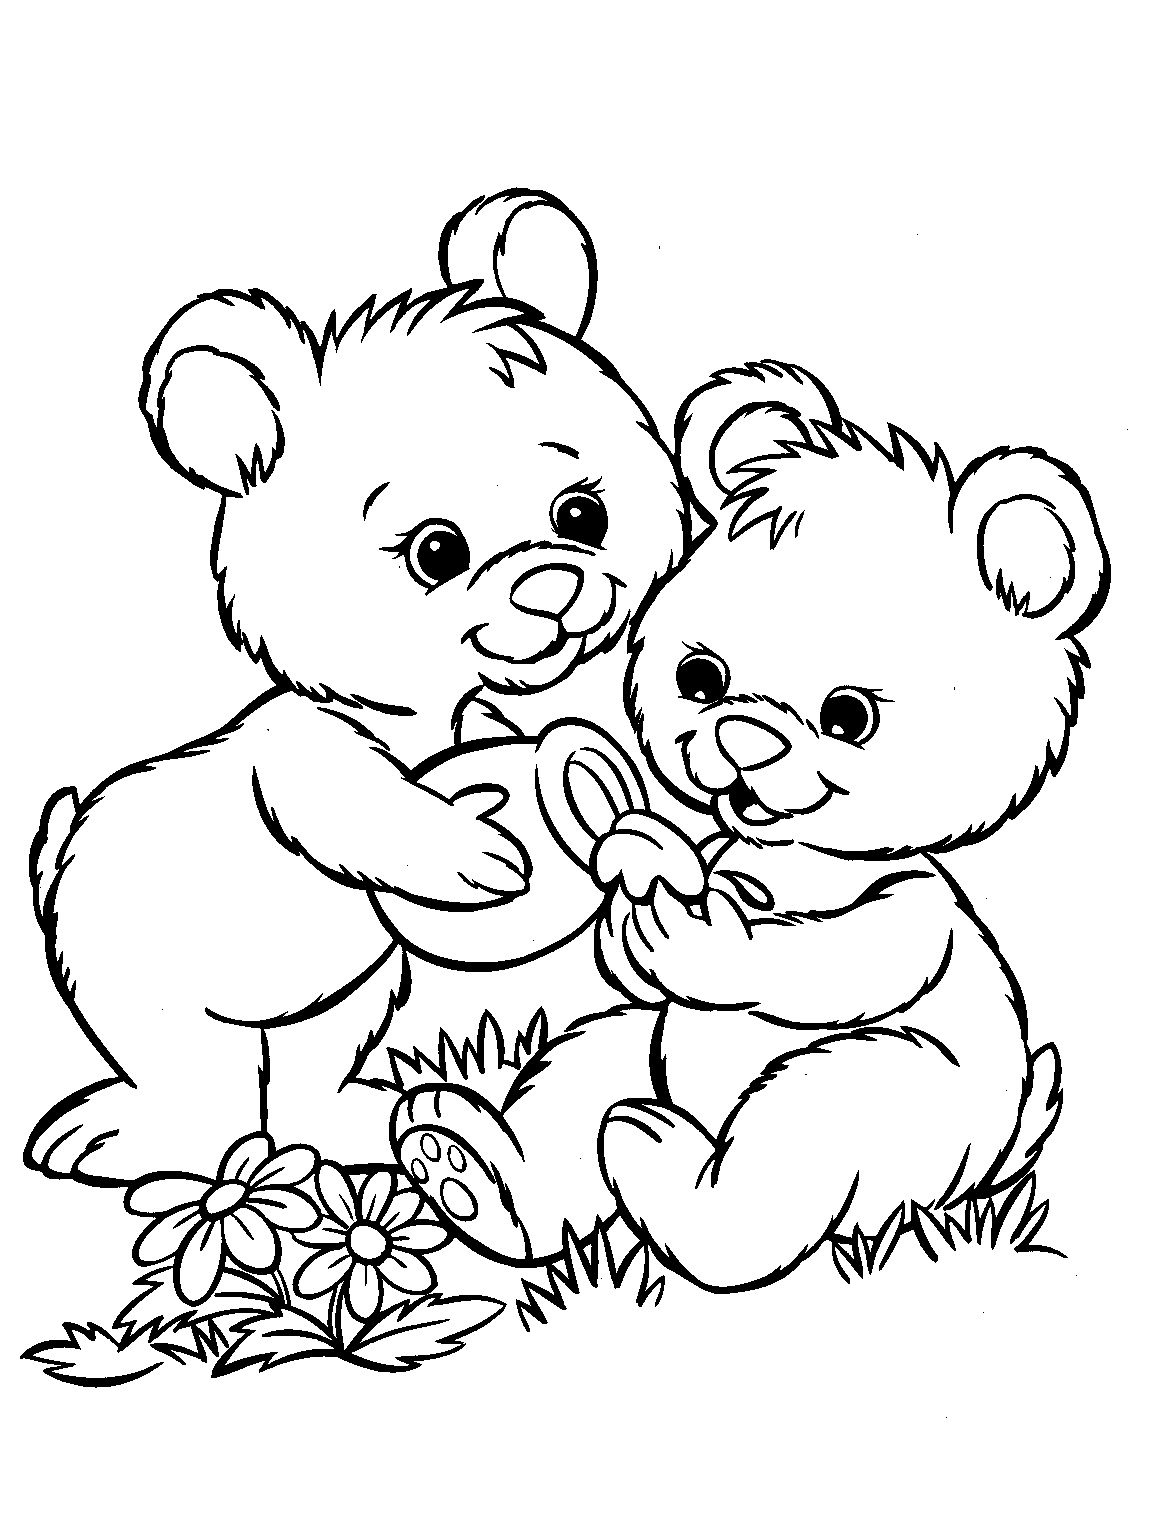 coloring pages of animals farm animal coloring pages to download and print for free of coloring pages animals 